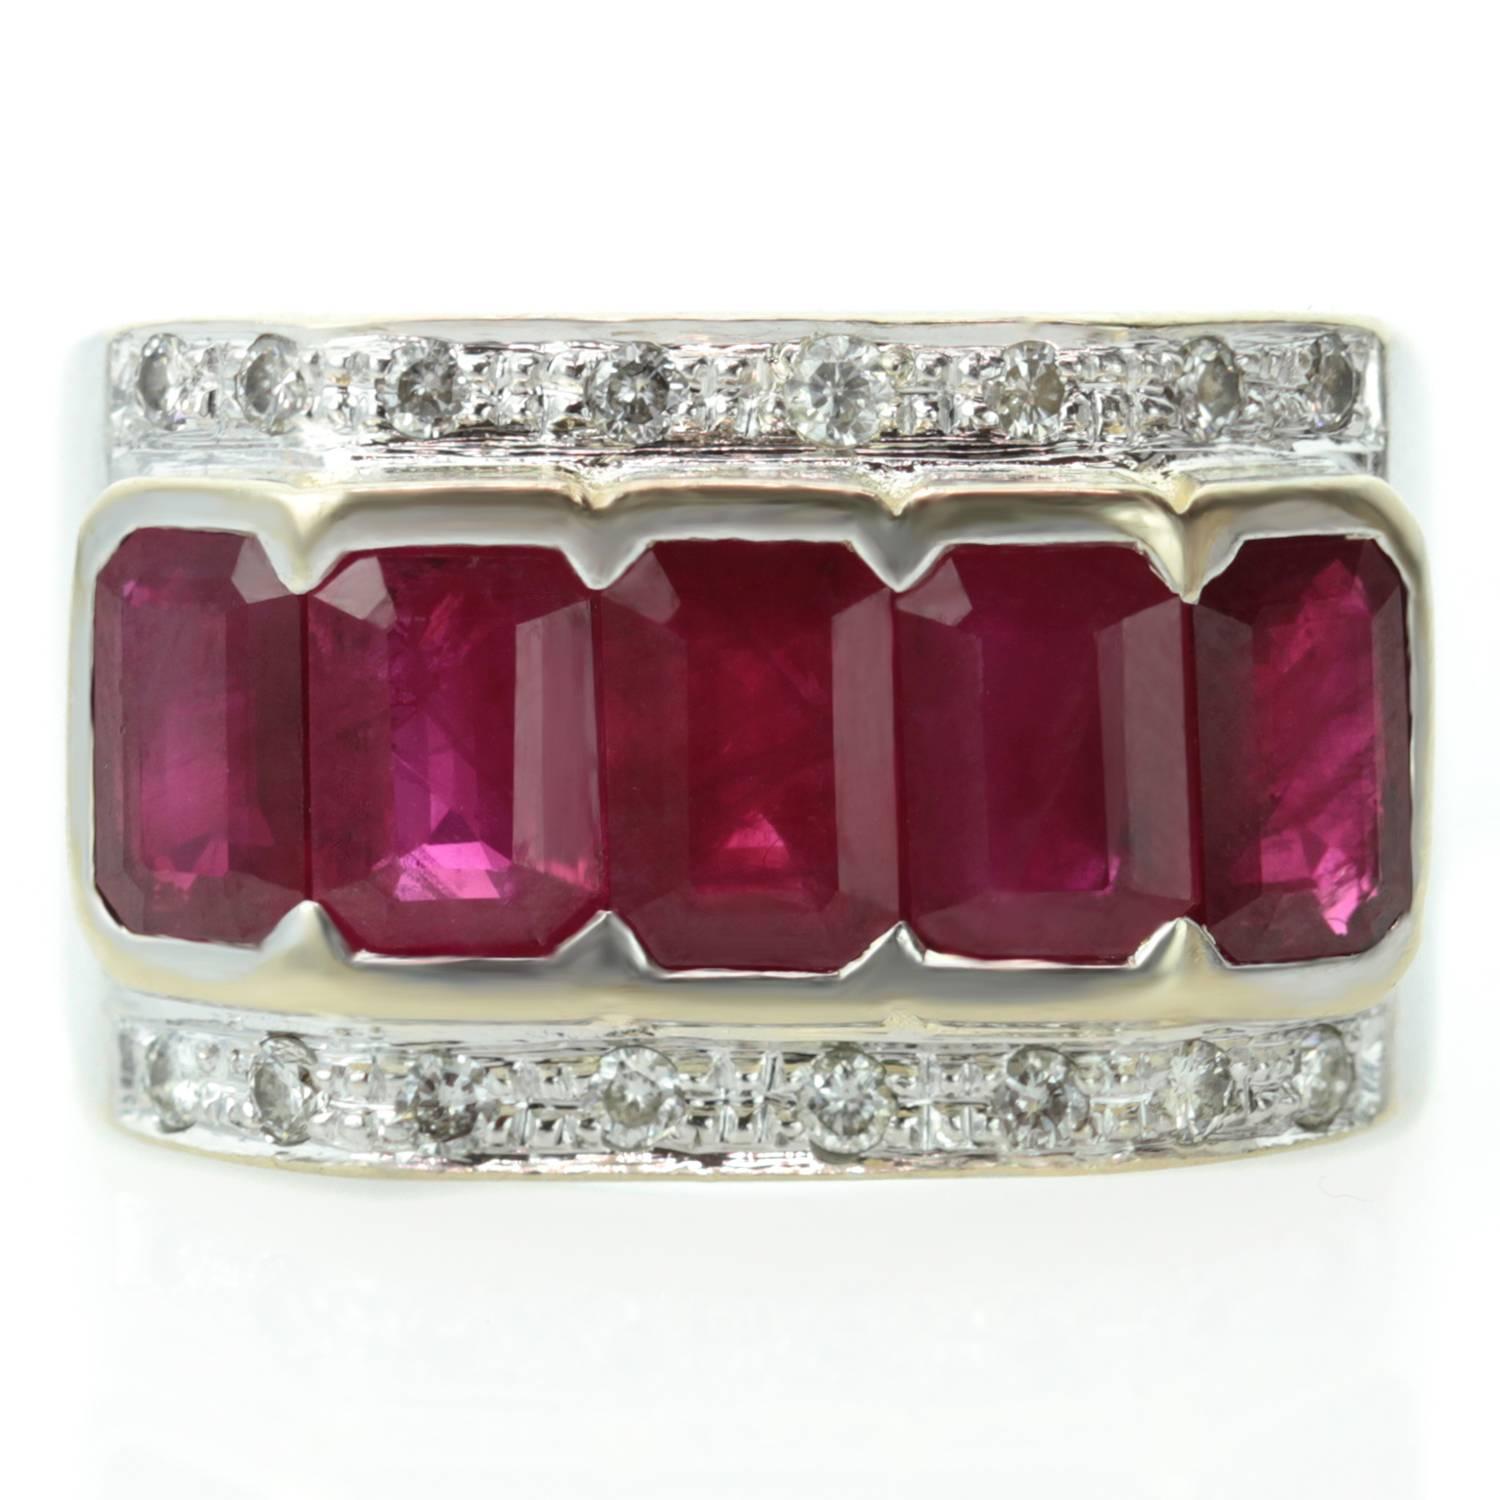 This stylish retro band is made in 18k white gold and features 5 emerald-cut 4.0mm x 6.0mm rubies set yellow gold and surrounded by sparkling round diamonds. Measurements: 0.47